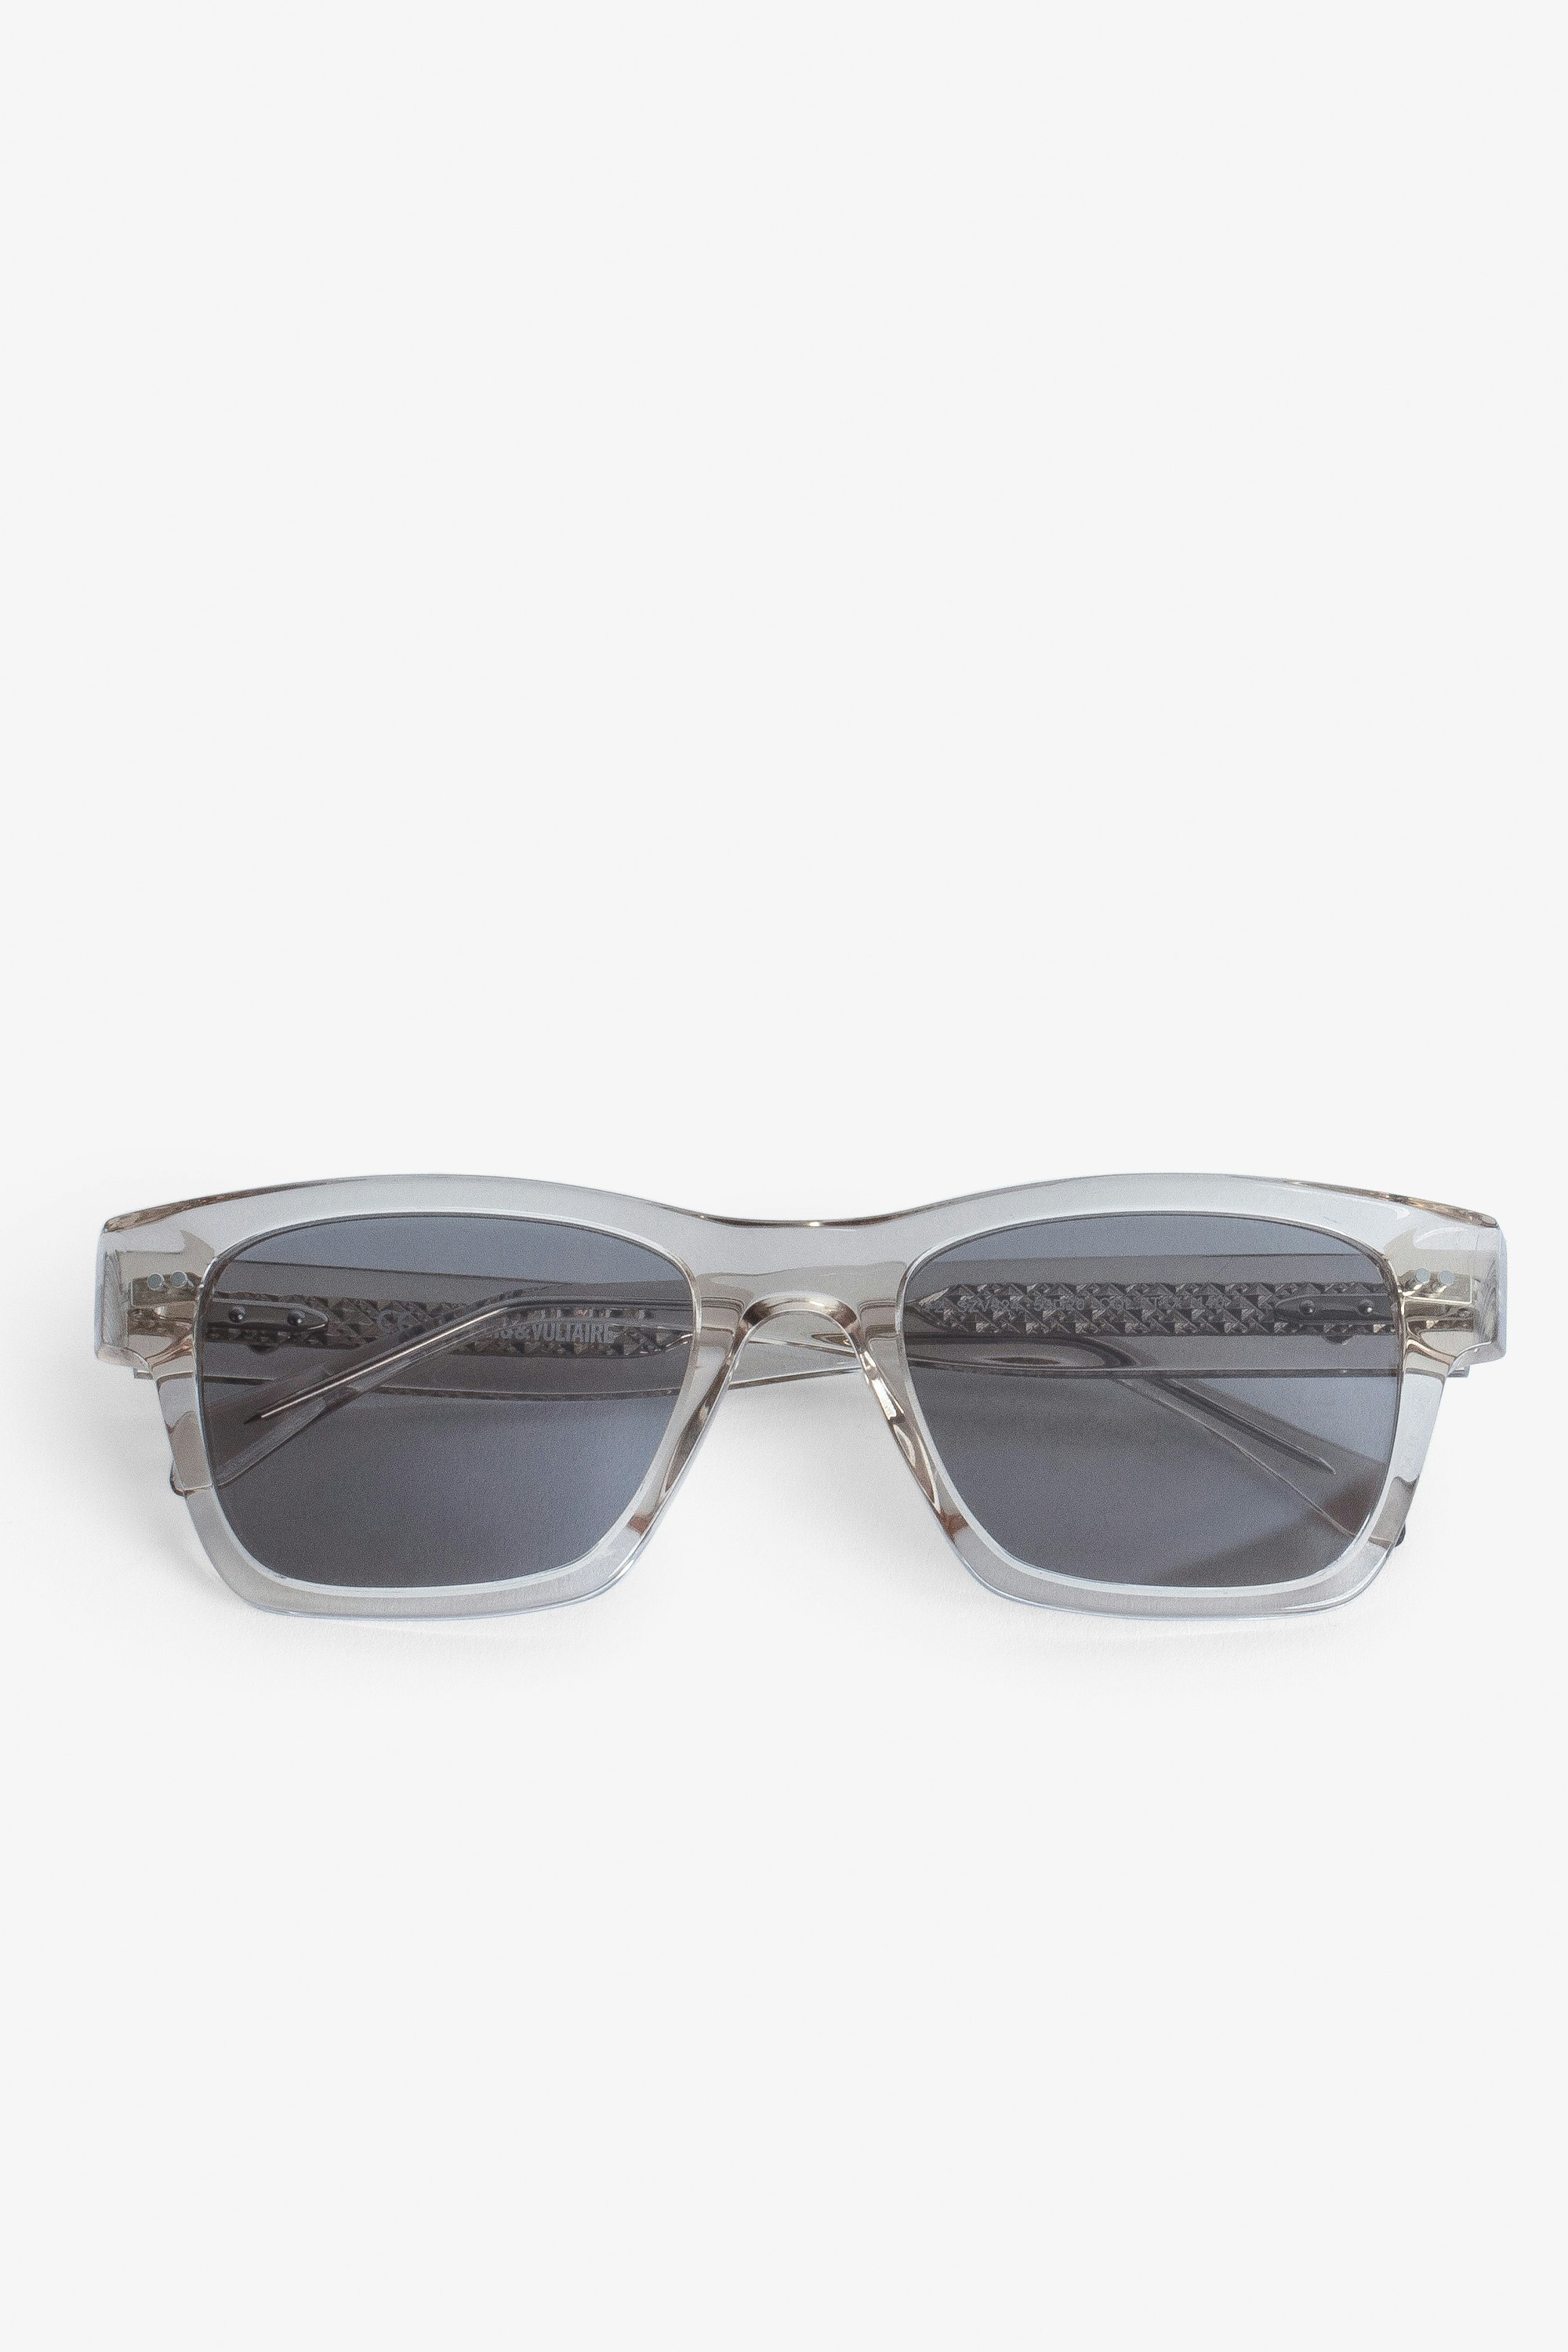 Transparent Wings サングラス Beige acetate sunglasses with wing detailing on temples